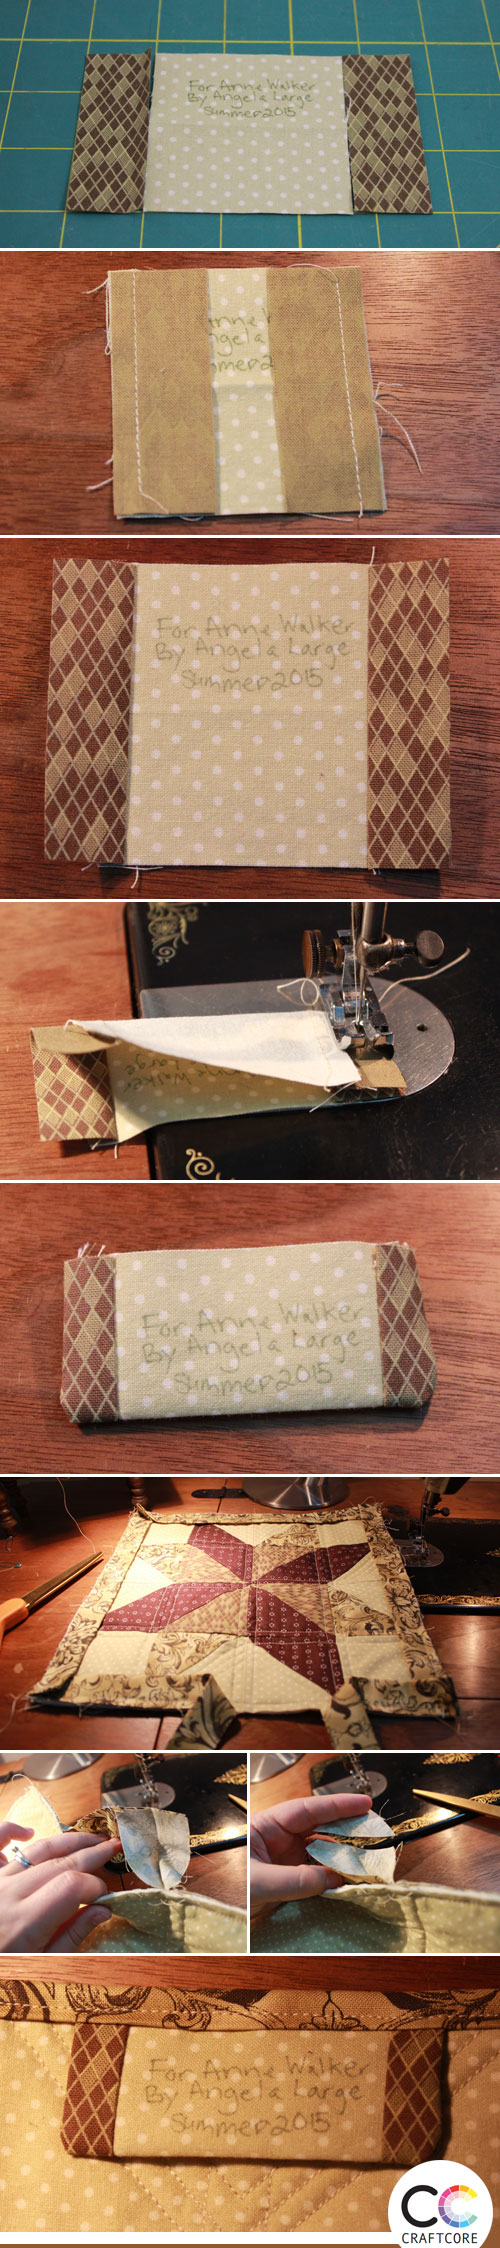 Craftcore | How to Make a Simple Binding Quilt Tag